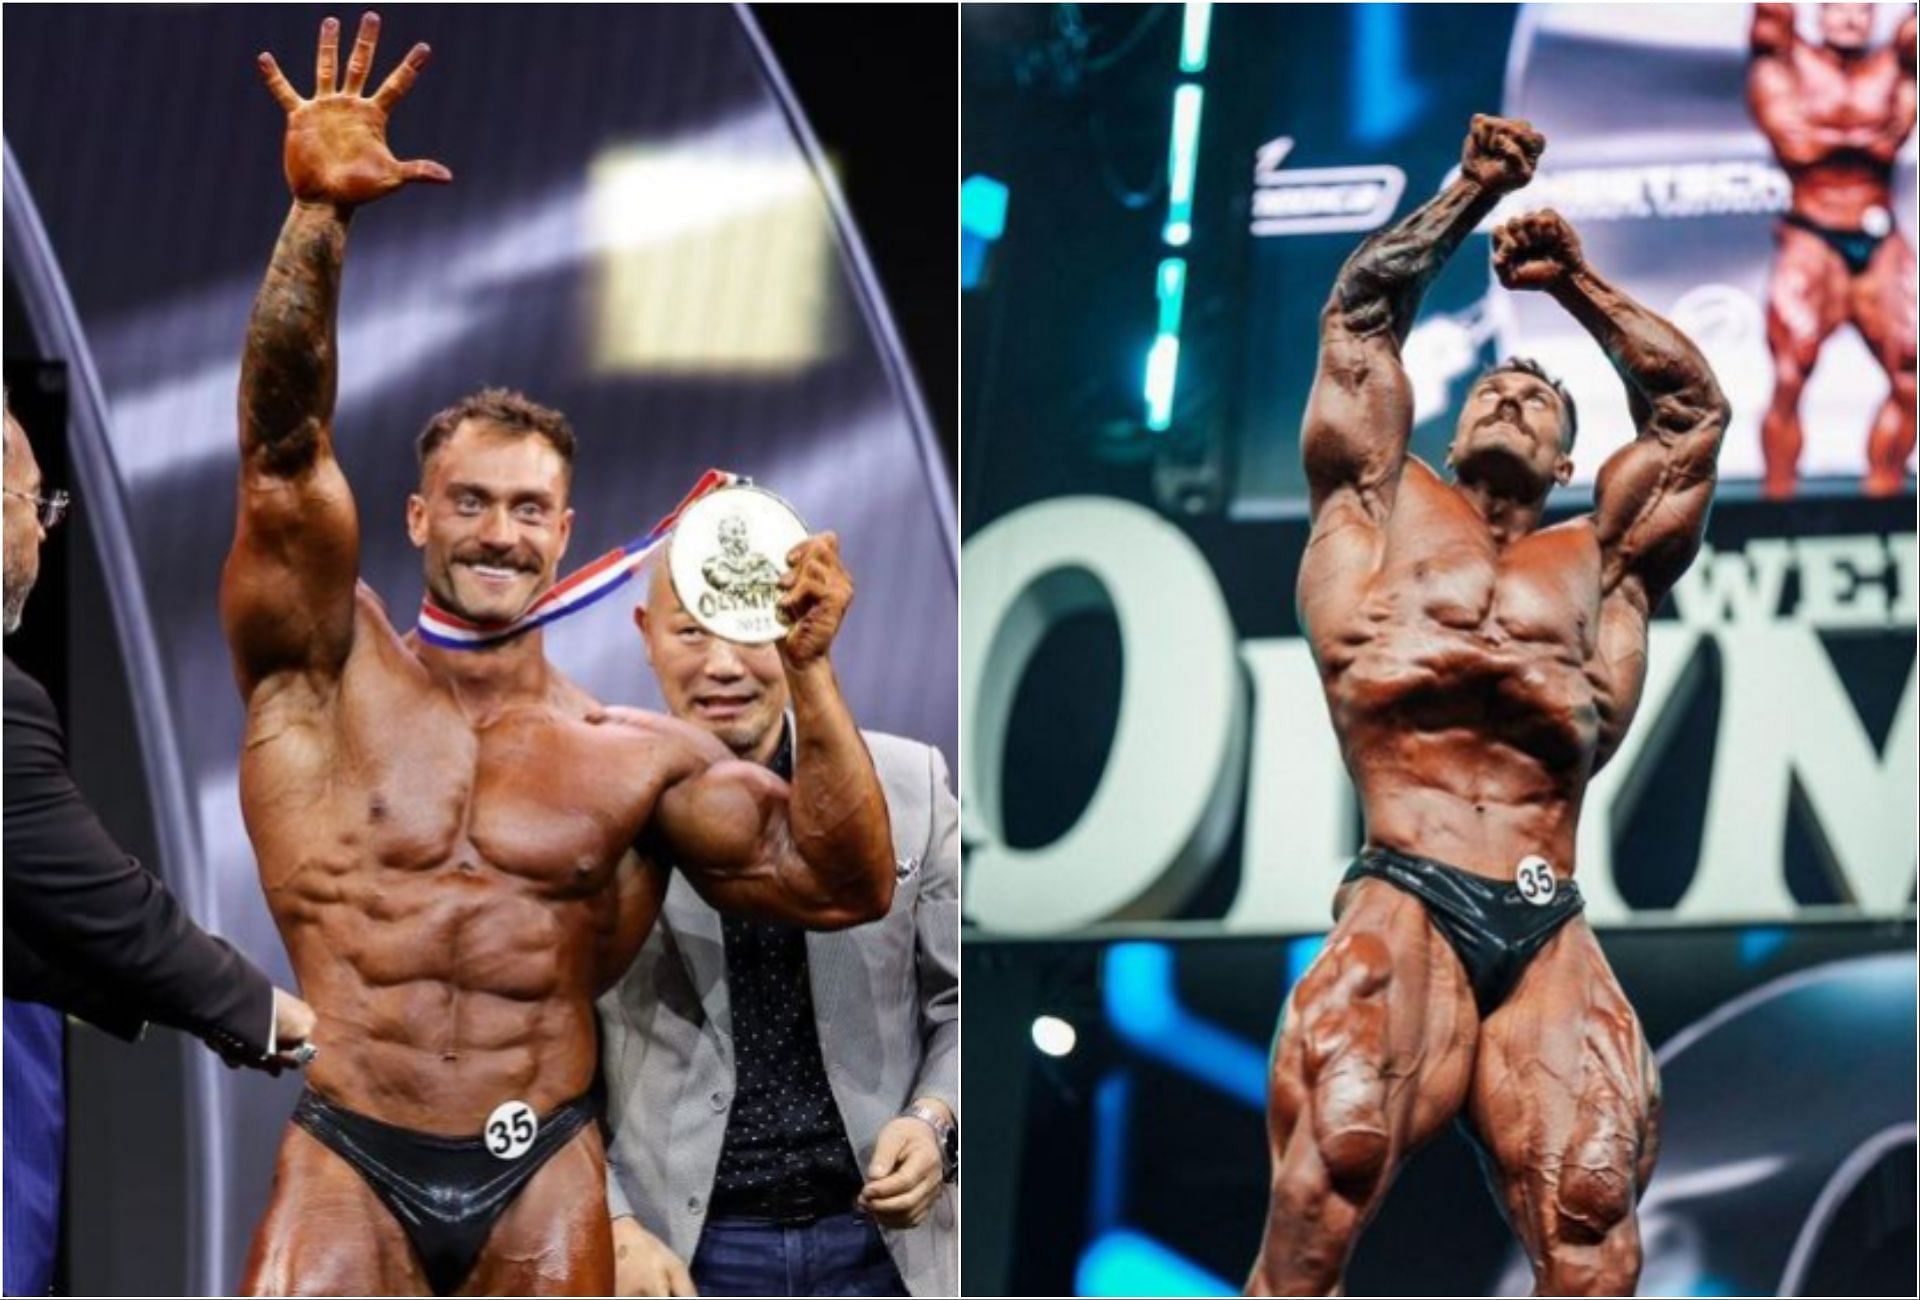 Chris Bumstead wins the 2023 Classic Physique Olympia (via instagram/@mrolympiallc)